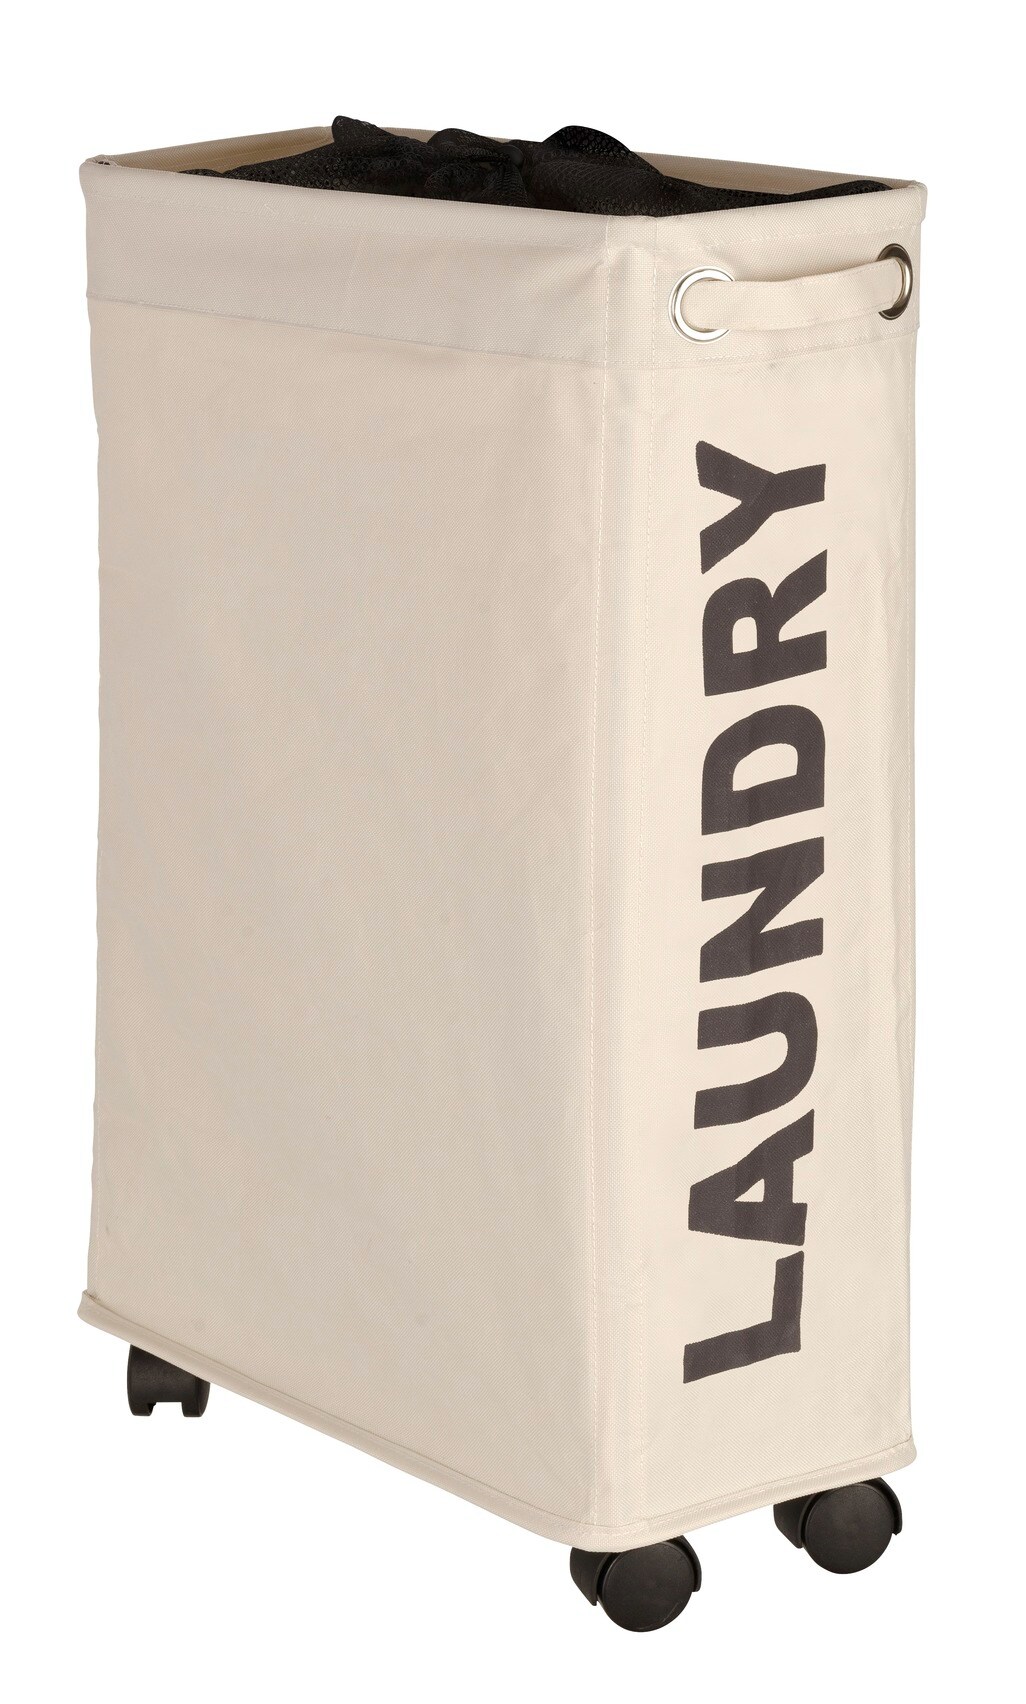 WENKO Polyester Laundry Basket at Lowes.com